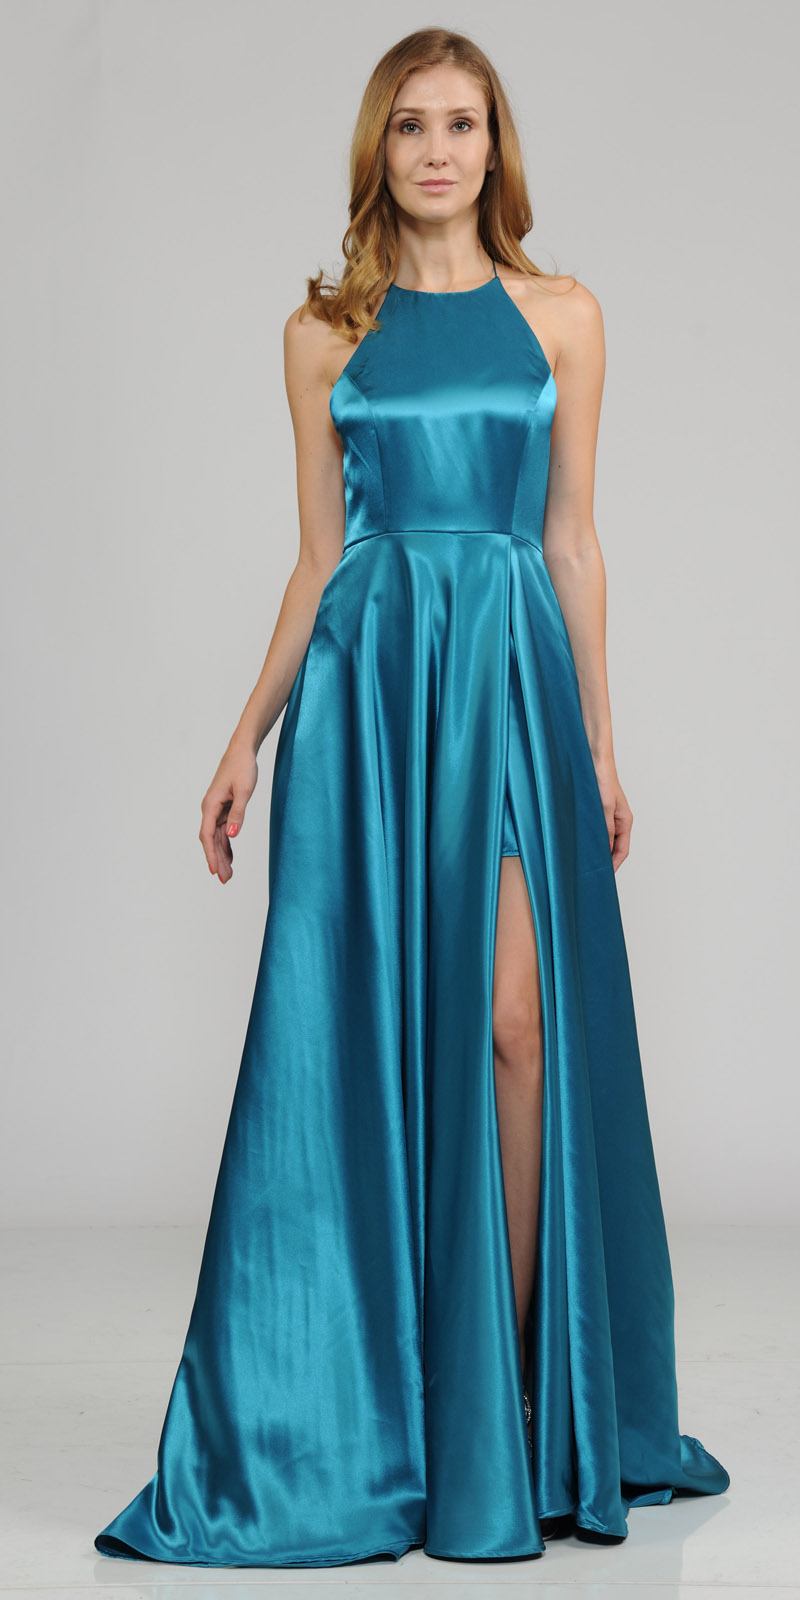 Teal Faux-Wrap Floor Length Prom Dress Strappy Open Back